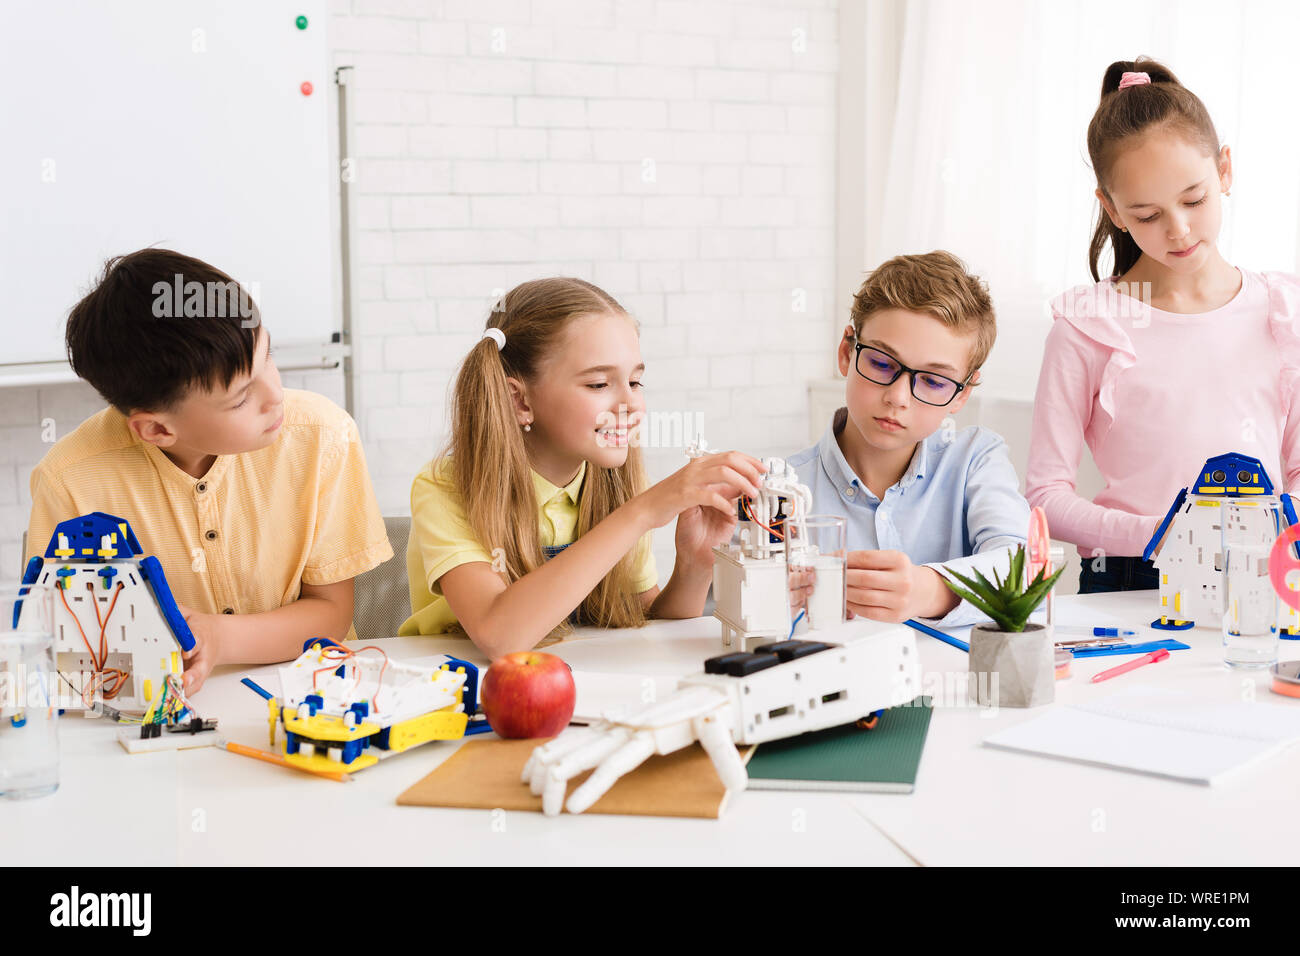 Excited children creating robots together at stem class Stock Photo